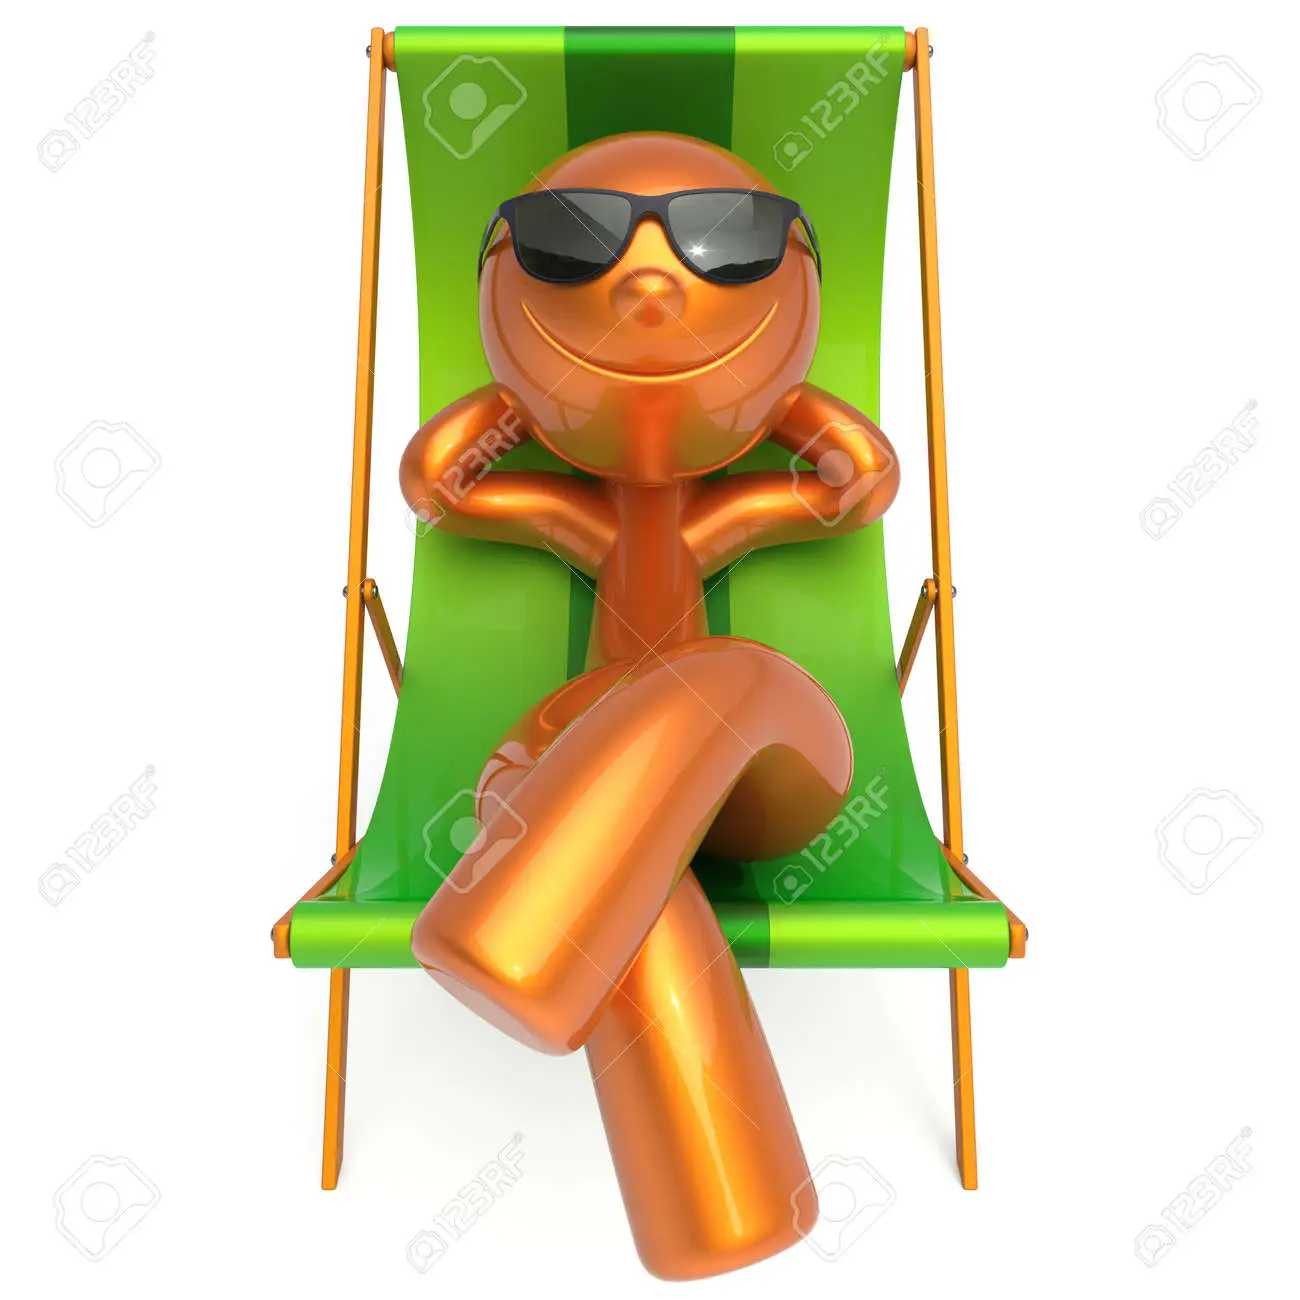 Man beach deck chair sunglasses smiling relaxing summer cartoon character chilling stylized person sun lounger tourist sunbathing rest outdoor vacation lifestyle travel destination d illustration stock photo picture and royalty free image